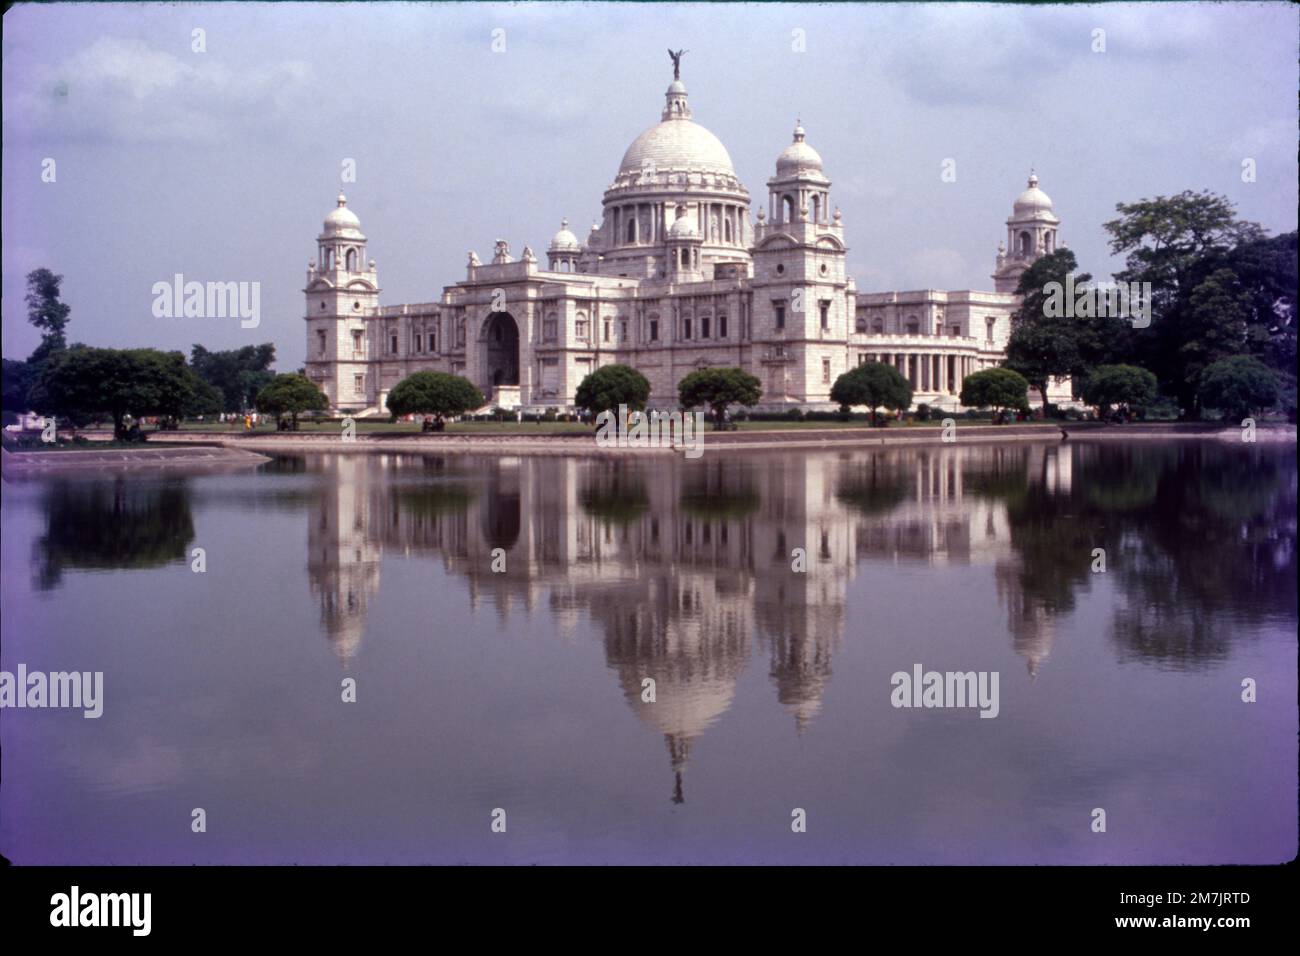 The Victoria Memorial is a large marble building on the Maidan in Central Kolkata, built between 1906 and 1921. It is dedicated to the memory of Queen Victoria, Empress of India from 1876 to 1901. Representing the resplendent and majestic British architecture, Victoria Memorial Hall stands today, as a veritable icon of the city of Kolkata. Located on 1 Queen's way, the VMH was envisaged by Lord Curzon, the Viceroy of British India, as a memorial to the deceased Queen Victoria. Stock Photo